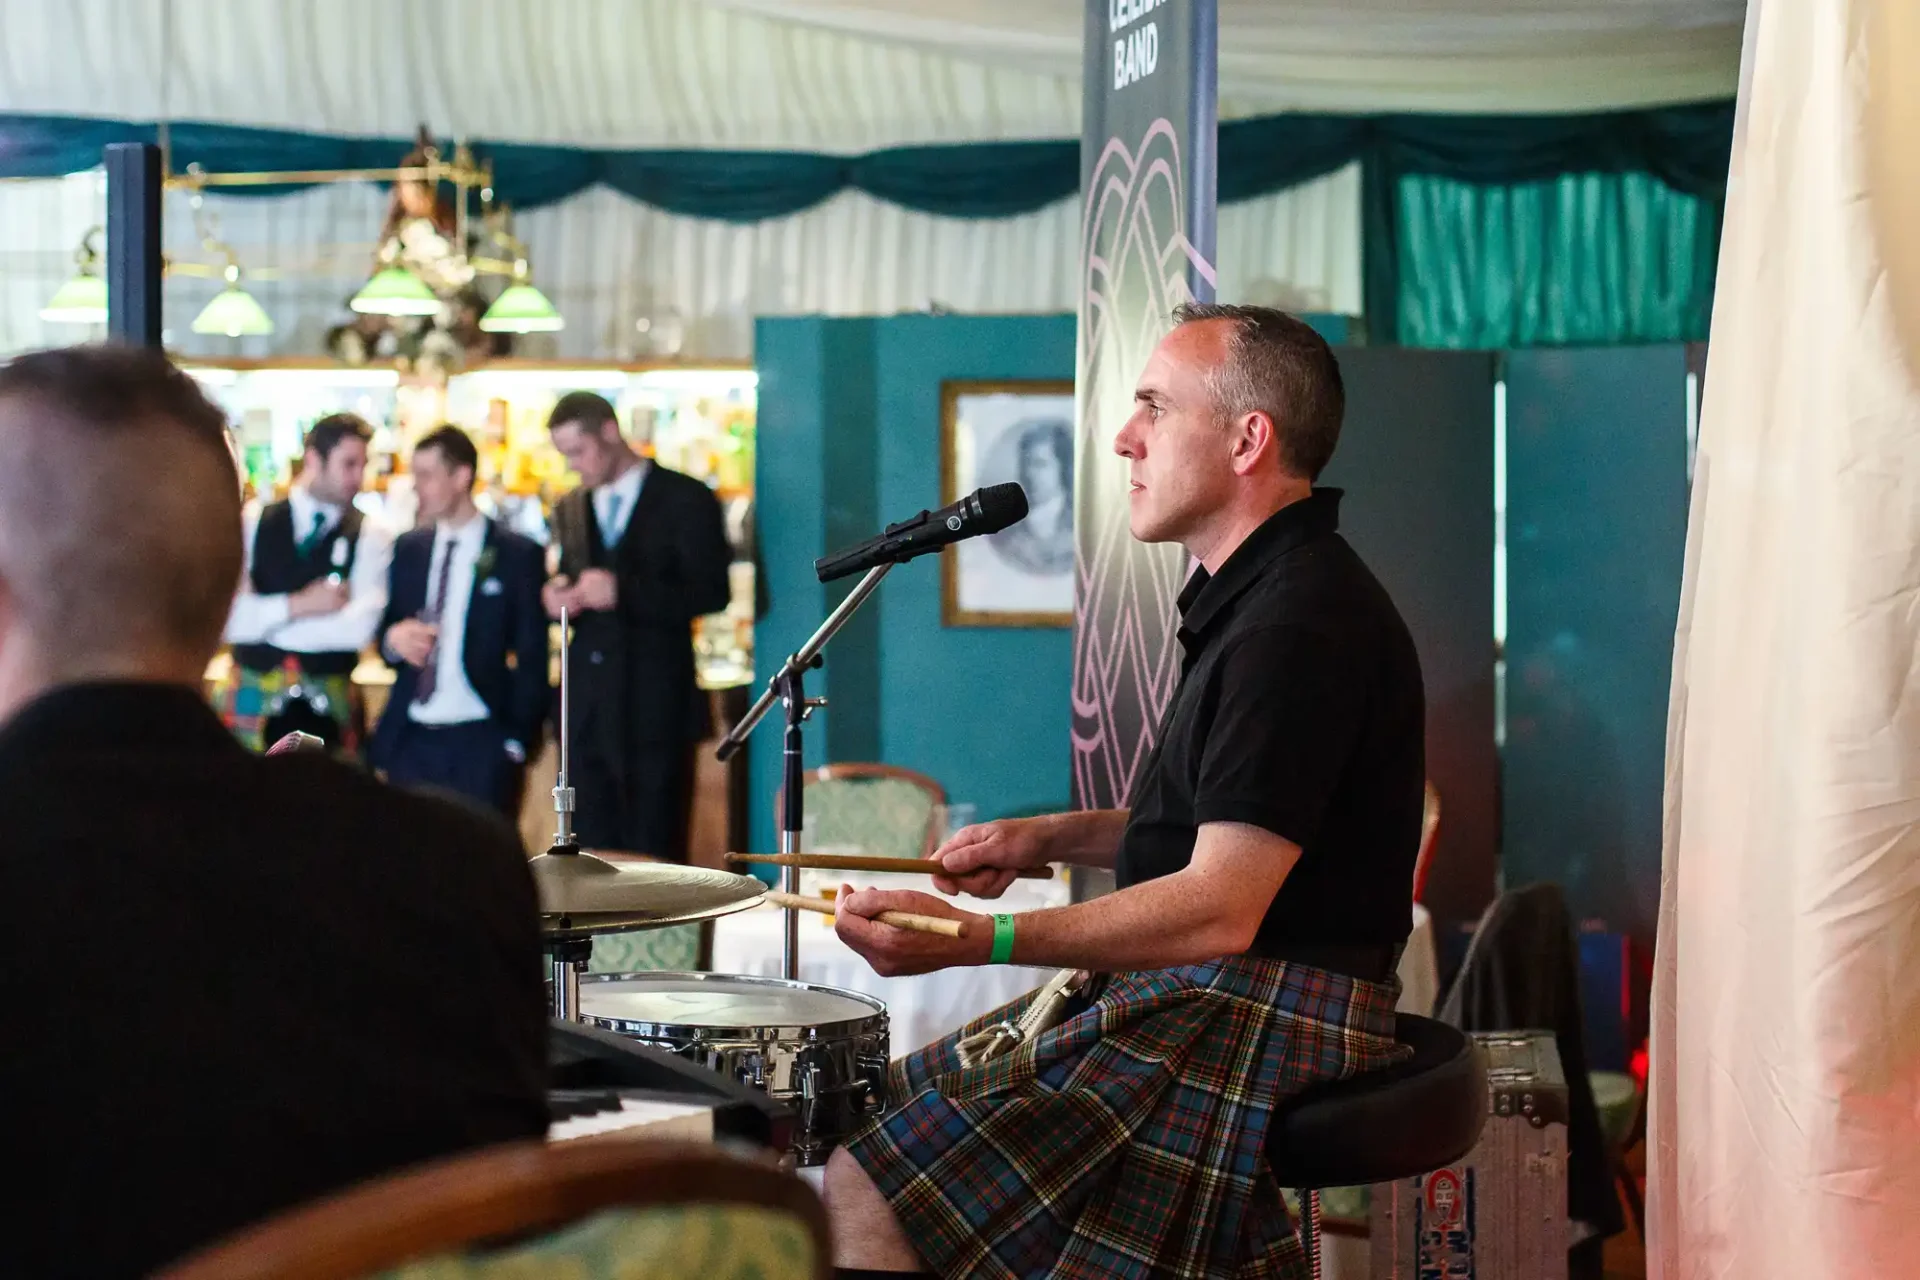 A drummer in a kilt performs at an indoor event, focused intently on his drum set, with audience members and musicians in the background.